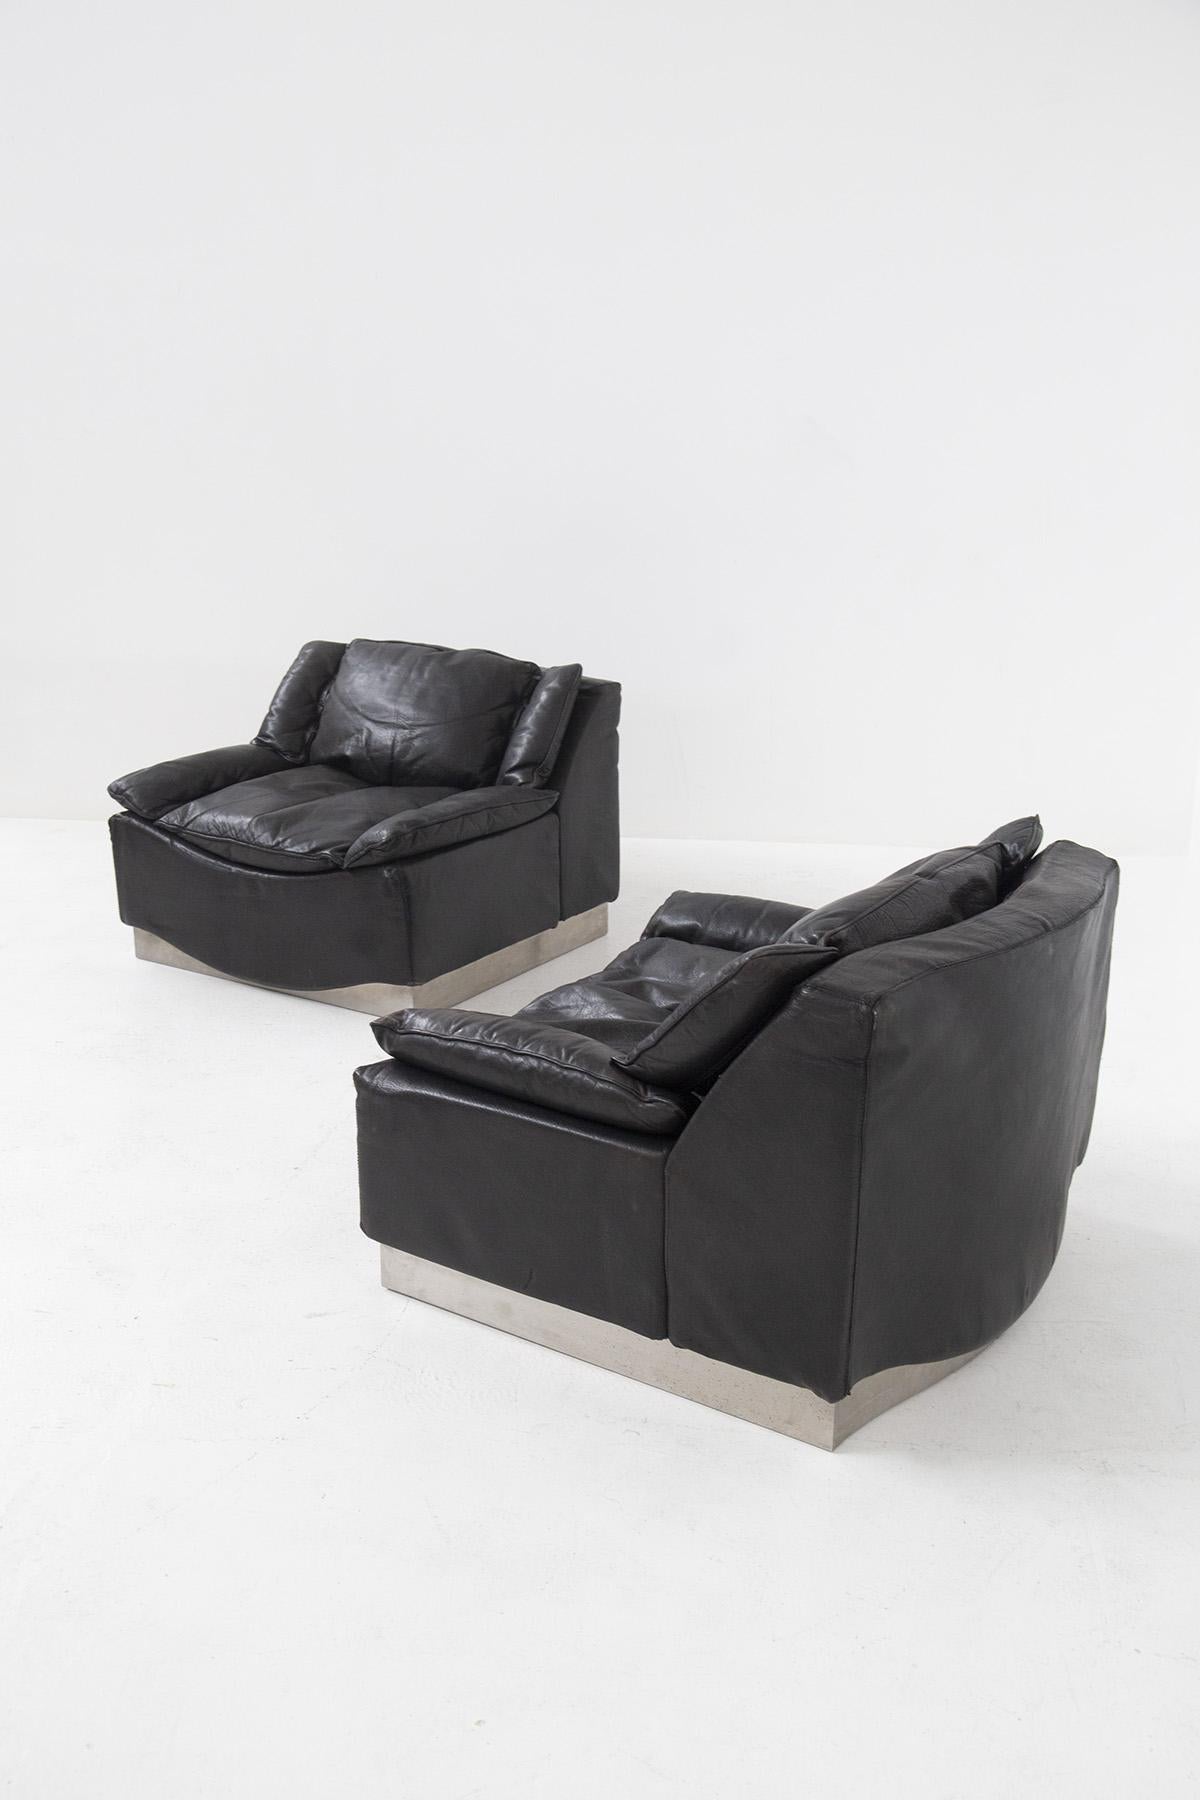 Luciano Frigerio Armchairs in Leather and Steel For Sale 2